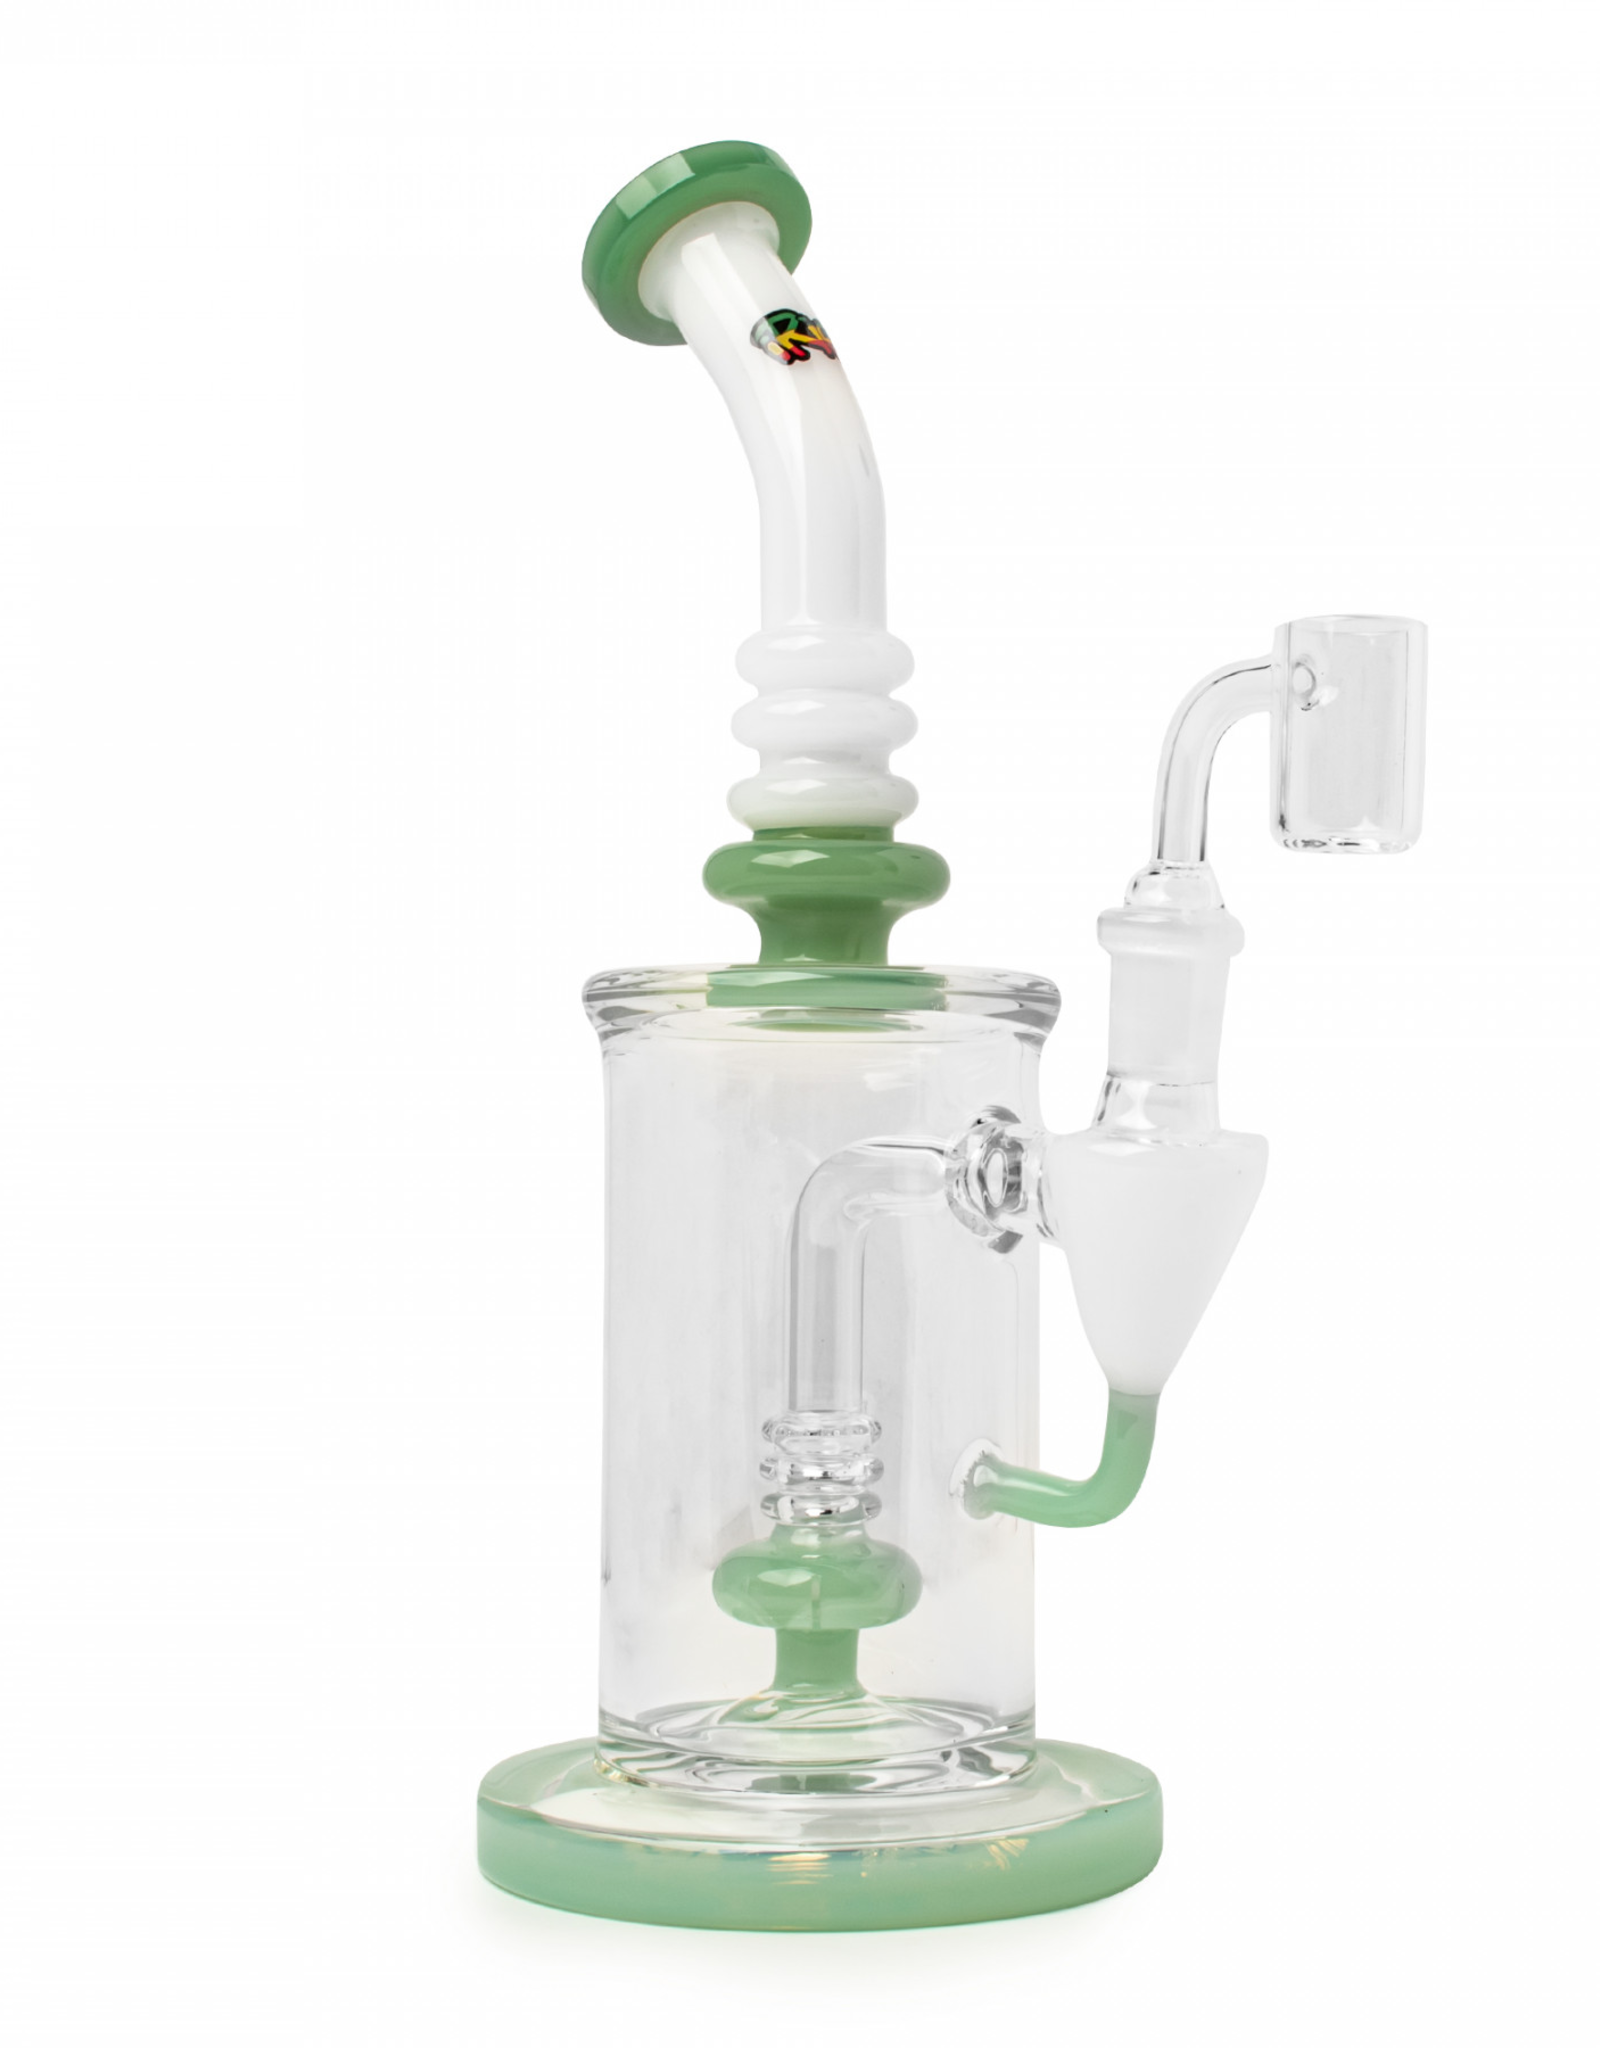 Irie 9" Discovery Rig by Irie